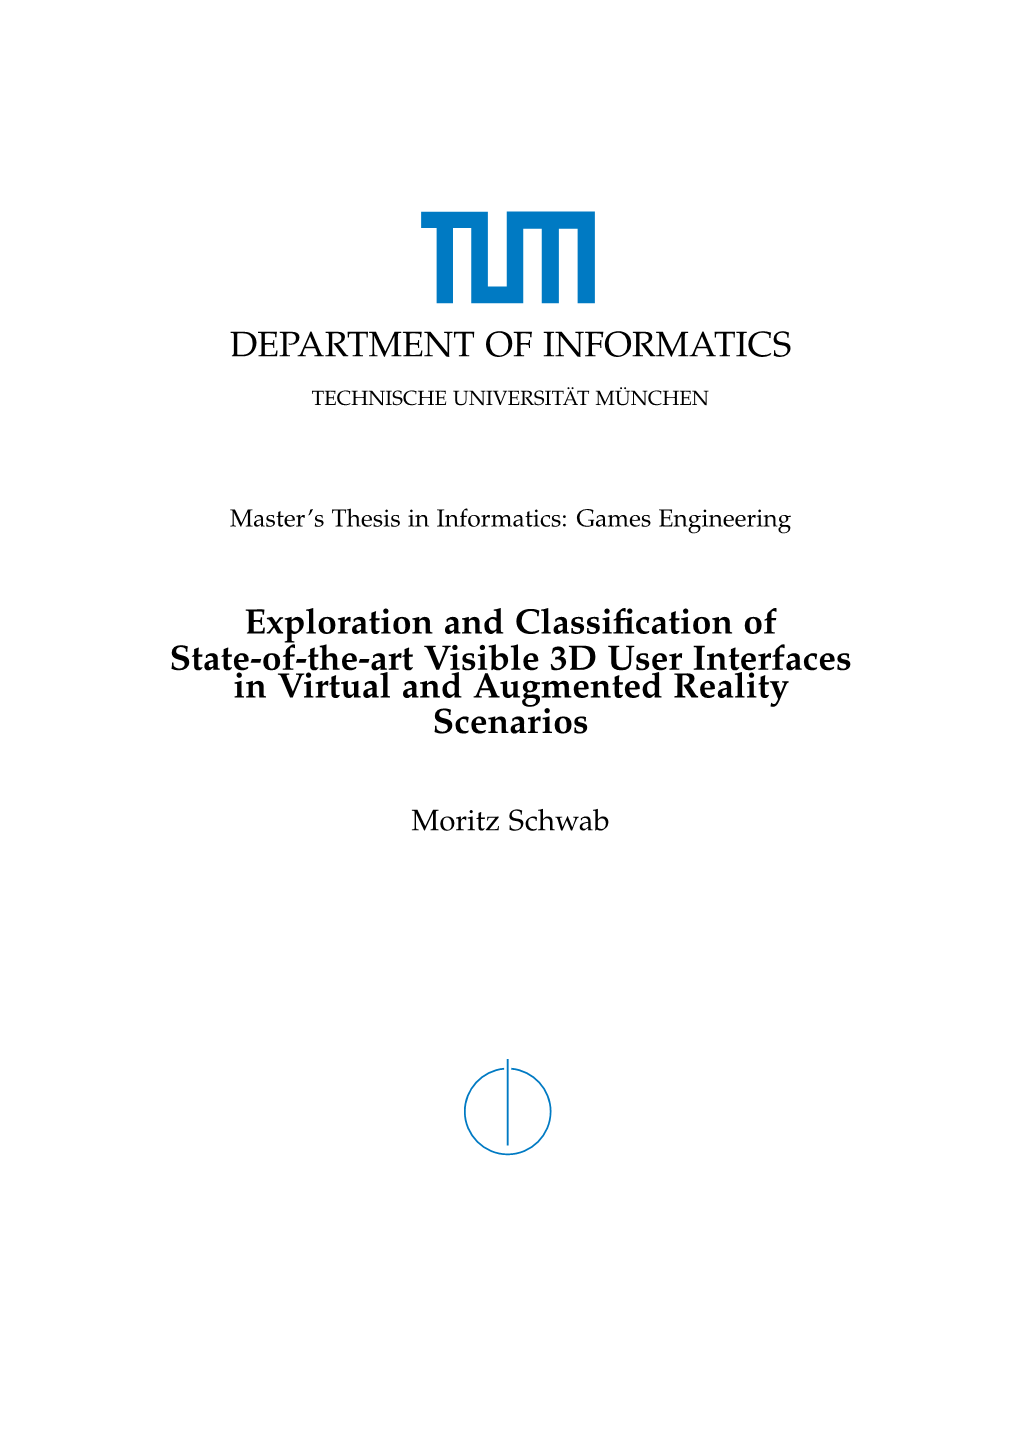 DEPARTMENT of INFORMATICS Exploration and Classification of State-Of-The-Art Visible 3D User Interfaces in Virtual and Augmented